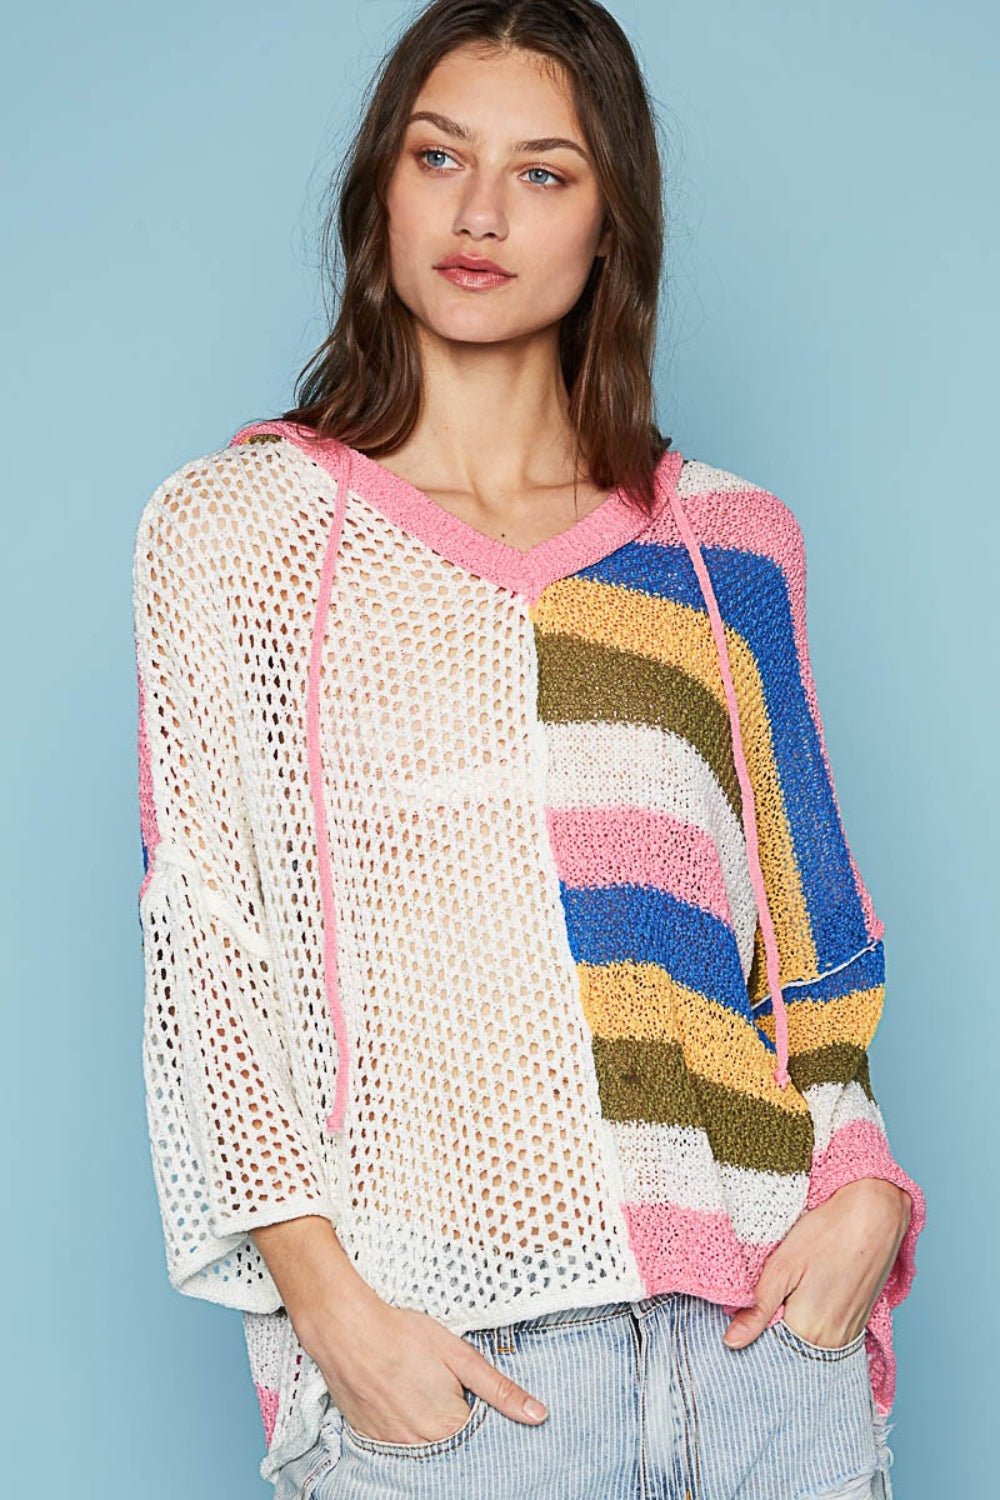 Openwork Color Block Hooded Knit Top in Ivory MultiTopPOL